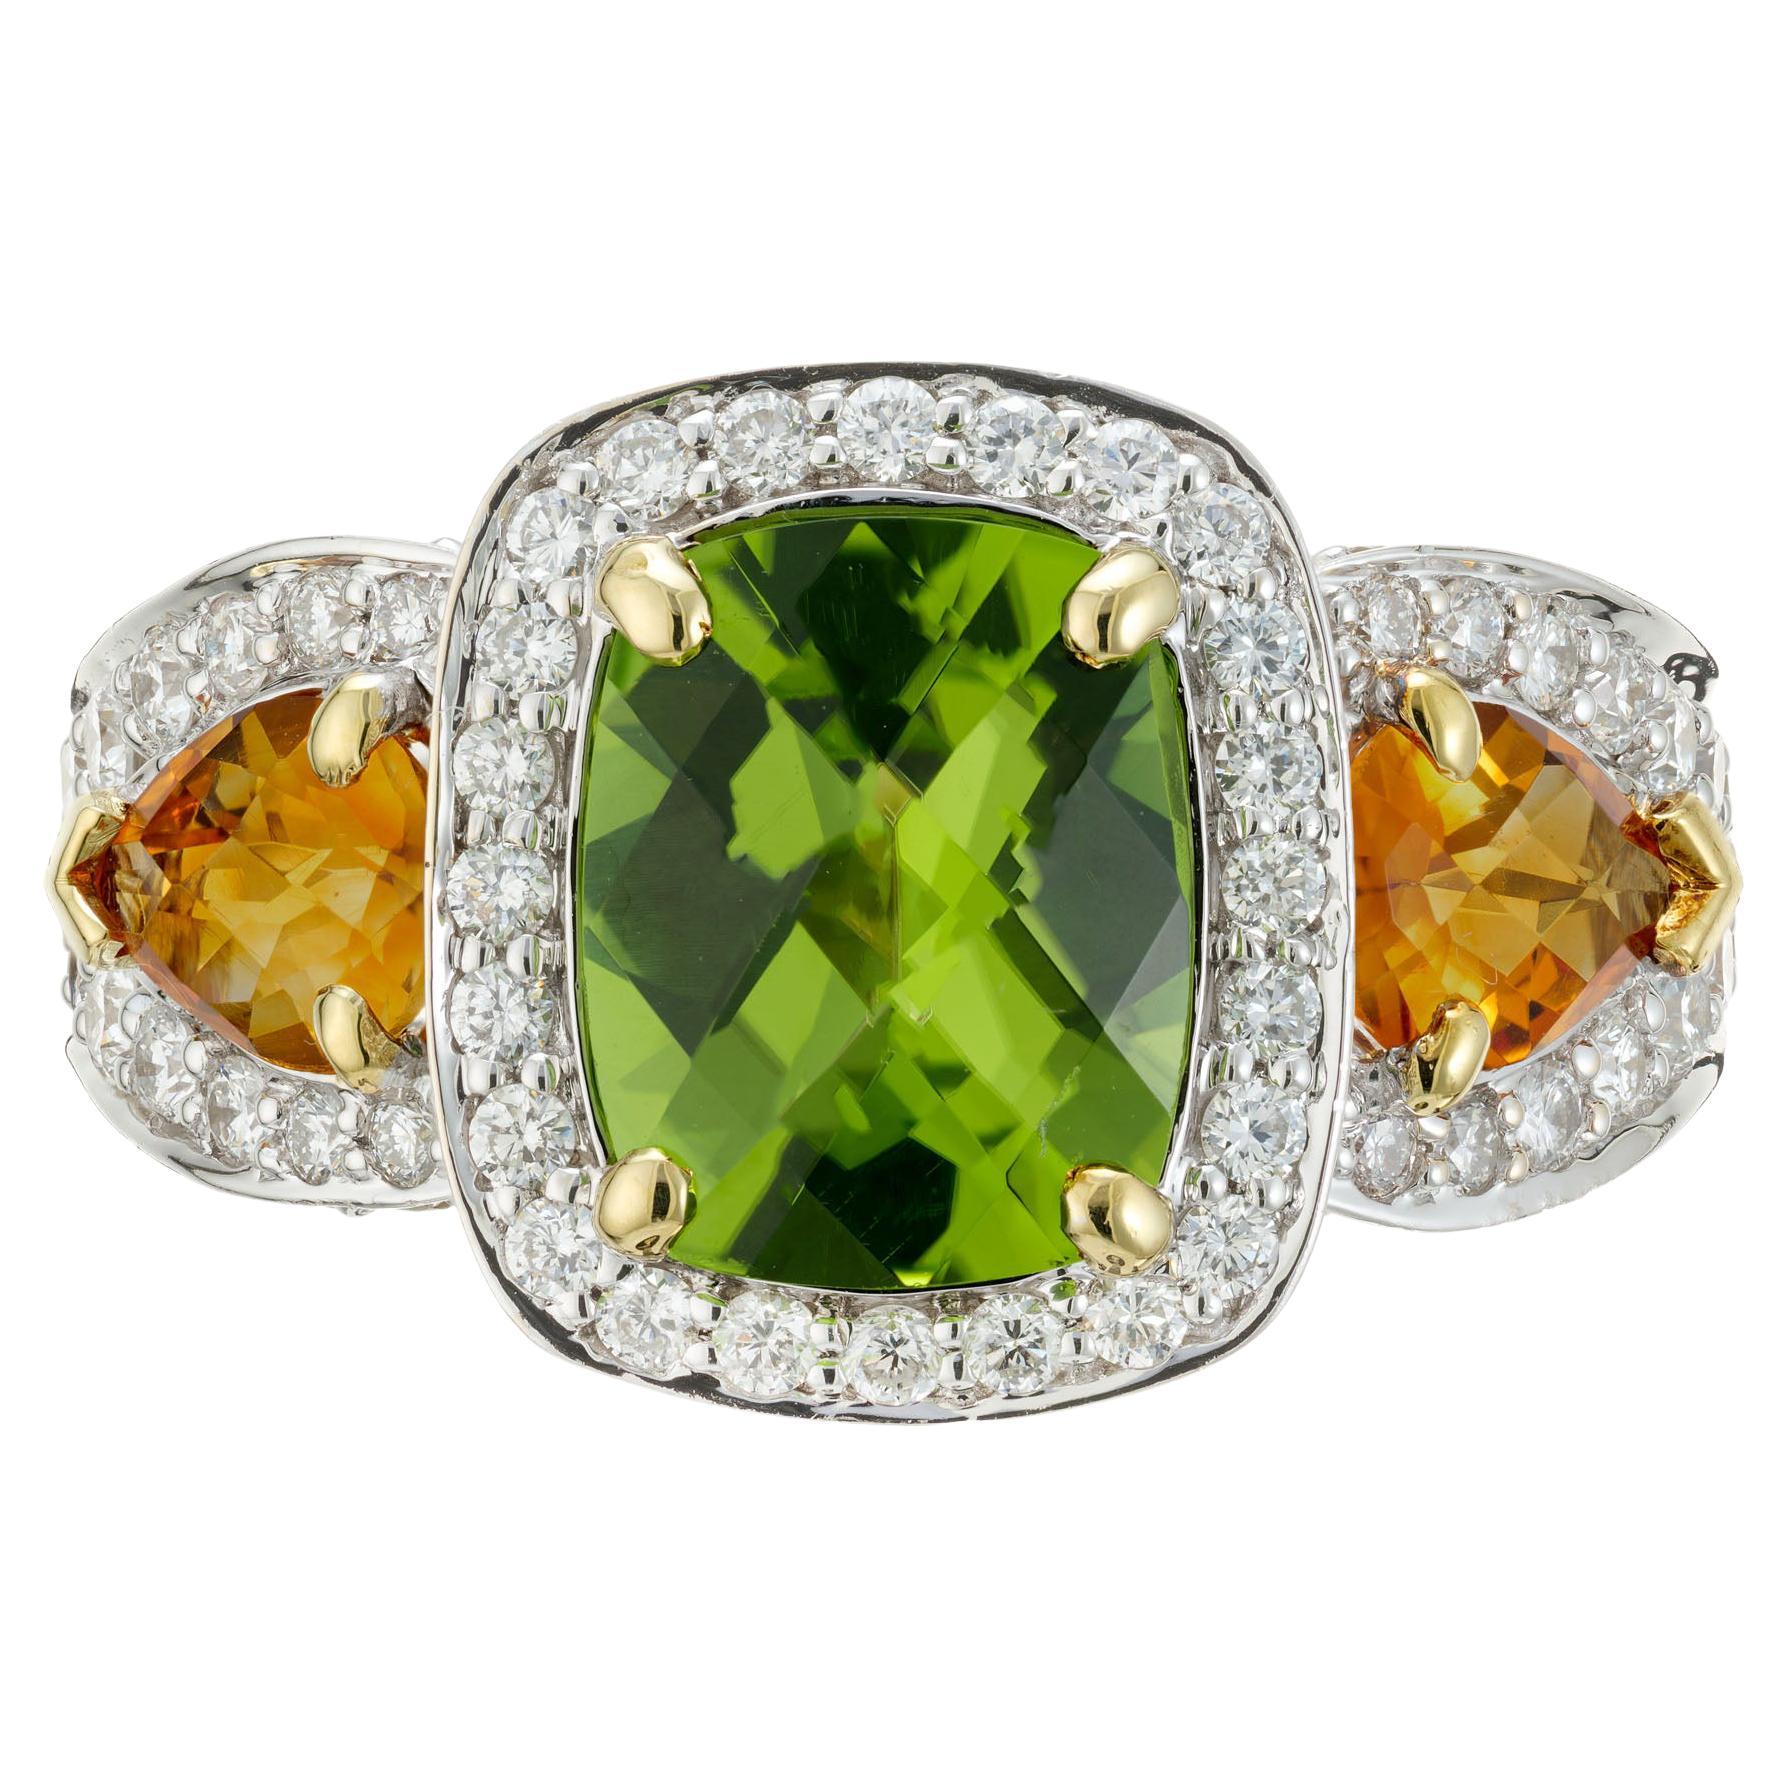 Charles Krypell Peridot Citrine Diamond Gold Cocktail Ring For Sale